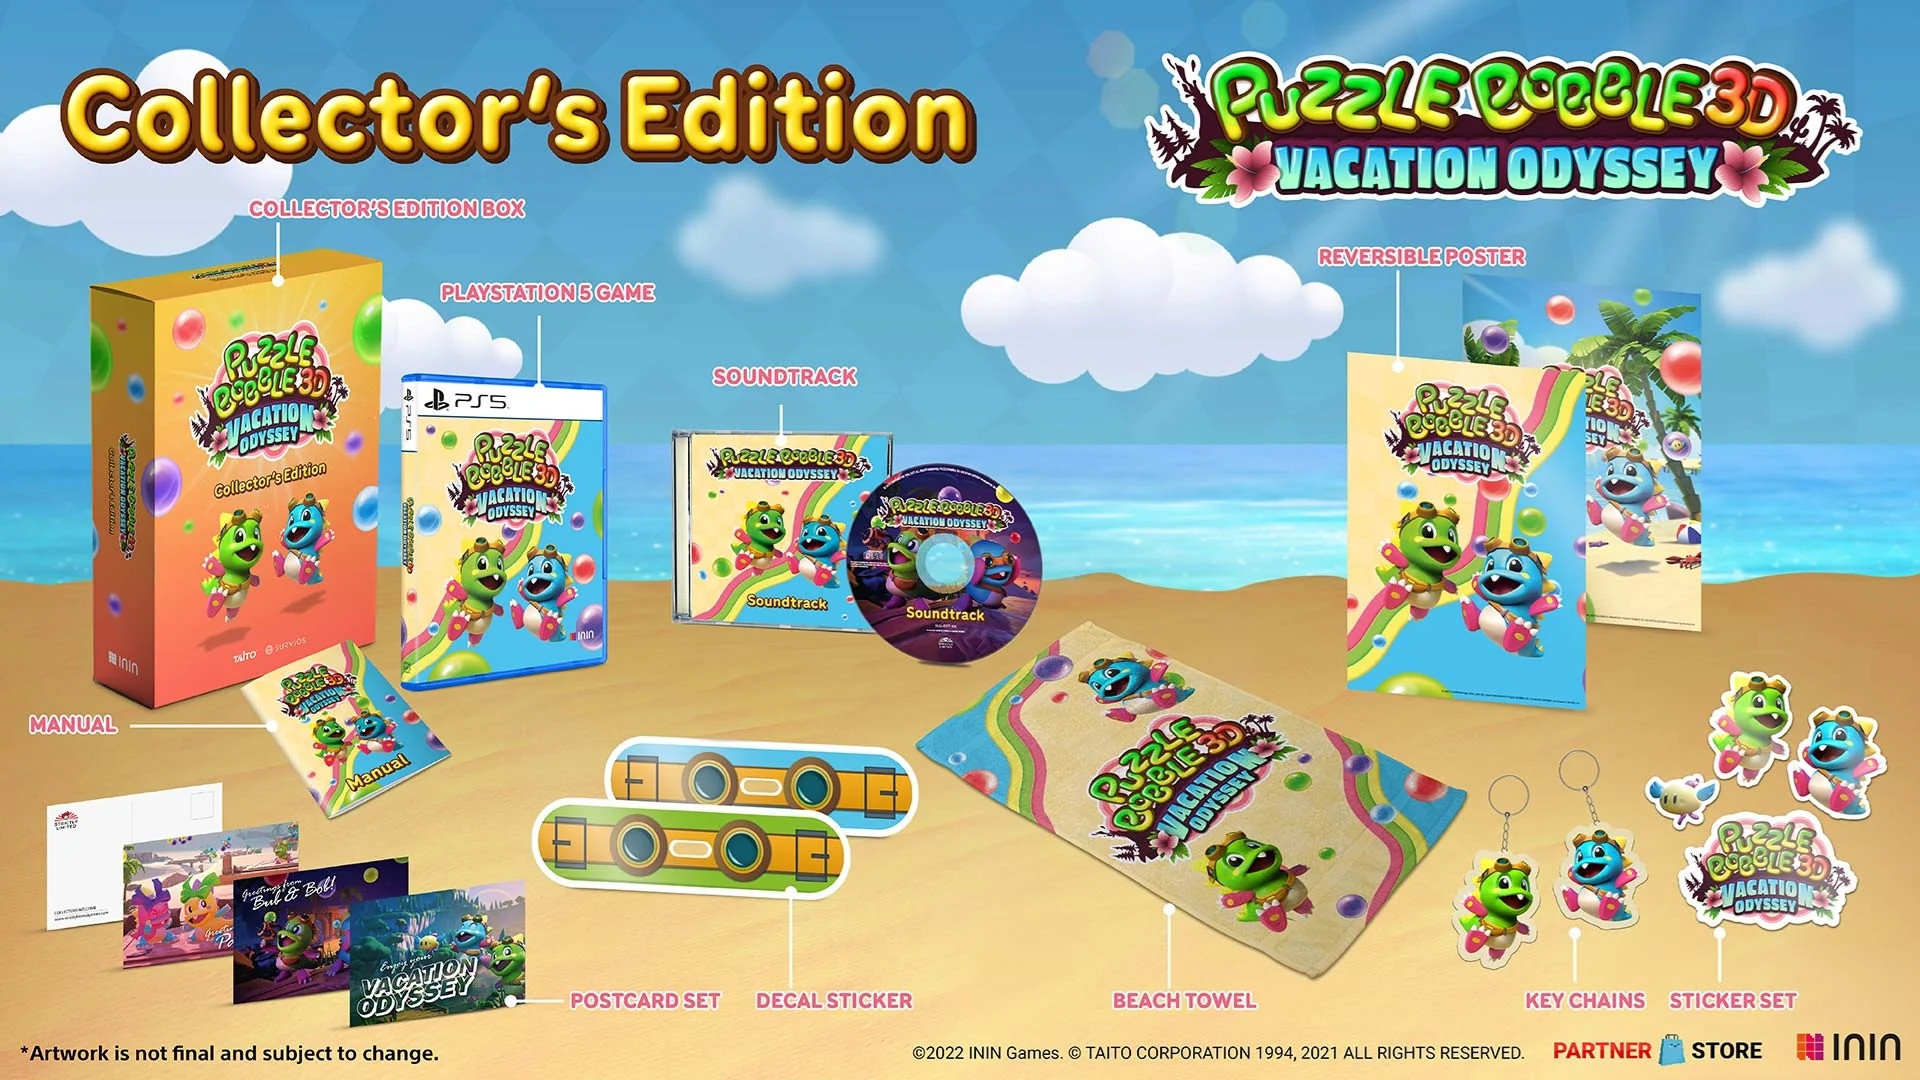 Puzzle Bobble 3D: Vacation Odyssey Collector's Edition